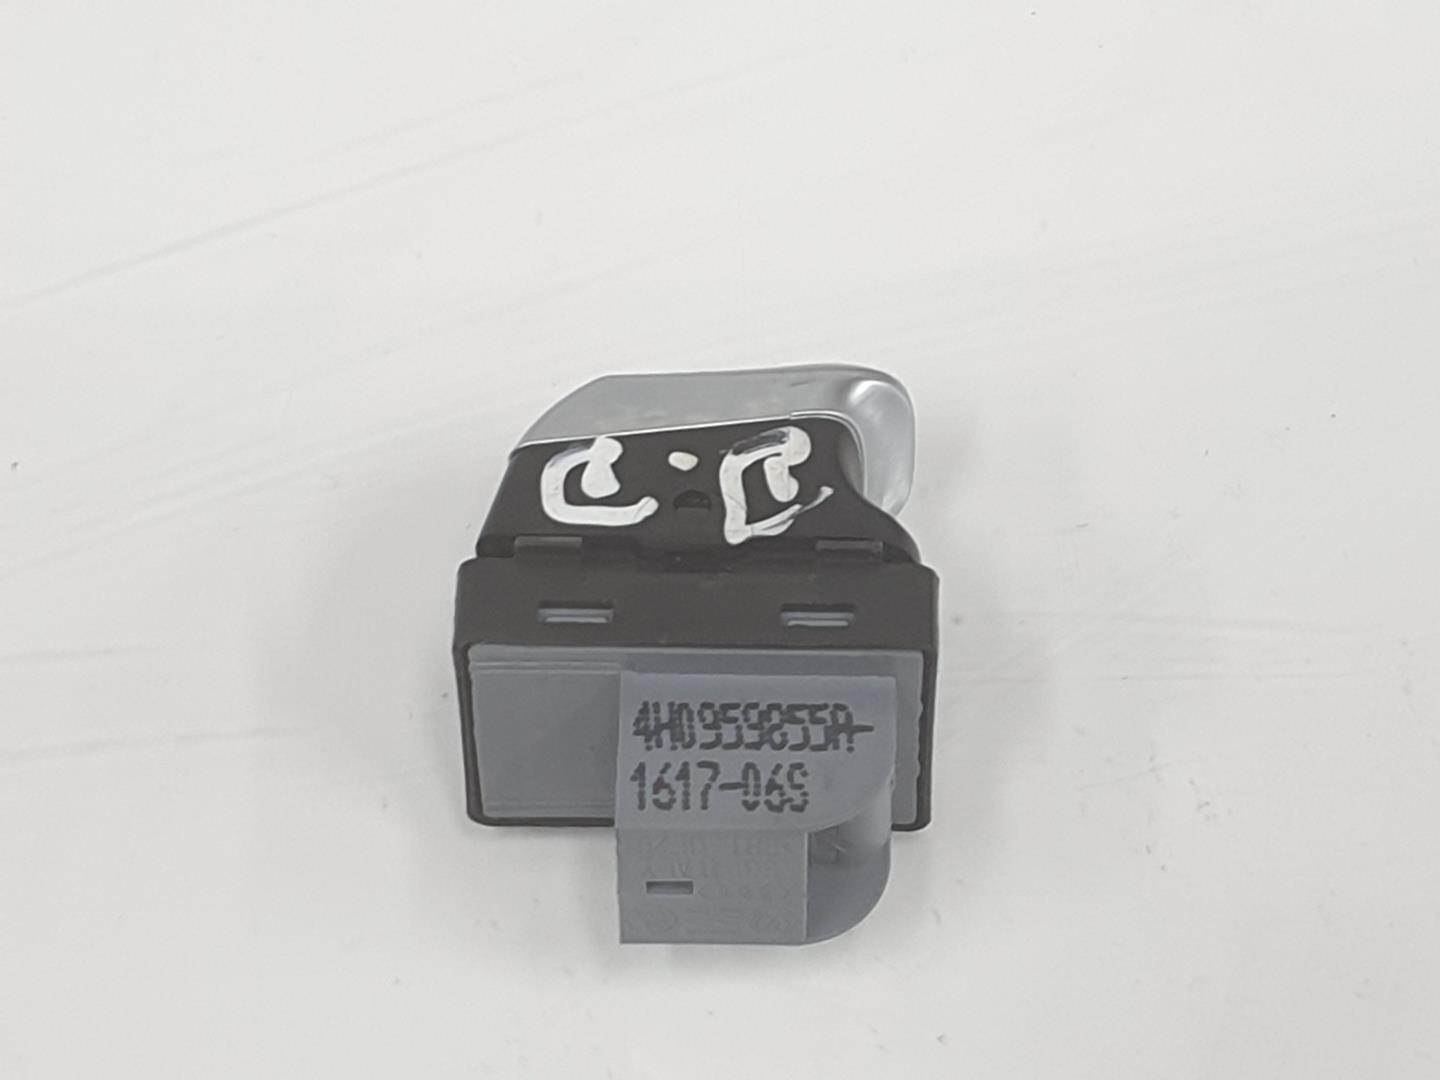 AUDI A7 C7/4G (2010-2020) Front Right Door Window Switch 4H0959855A, 4H0959855A 19779216